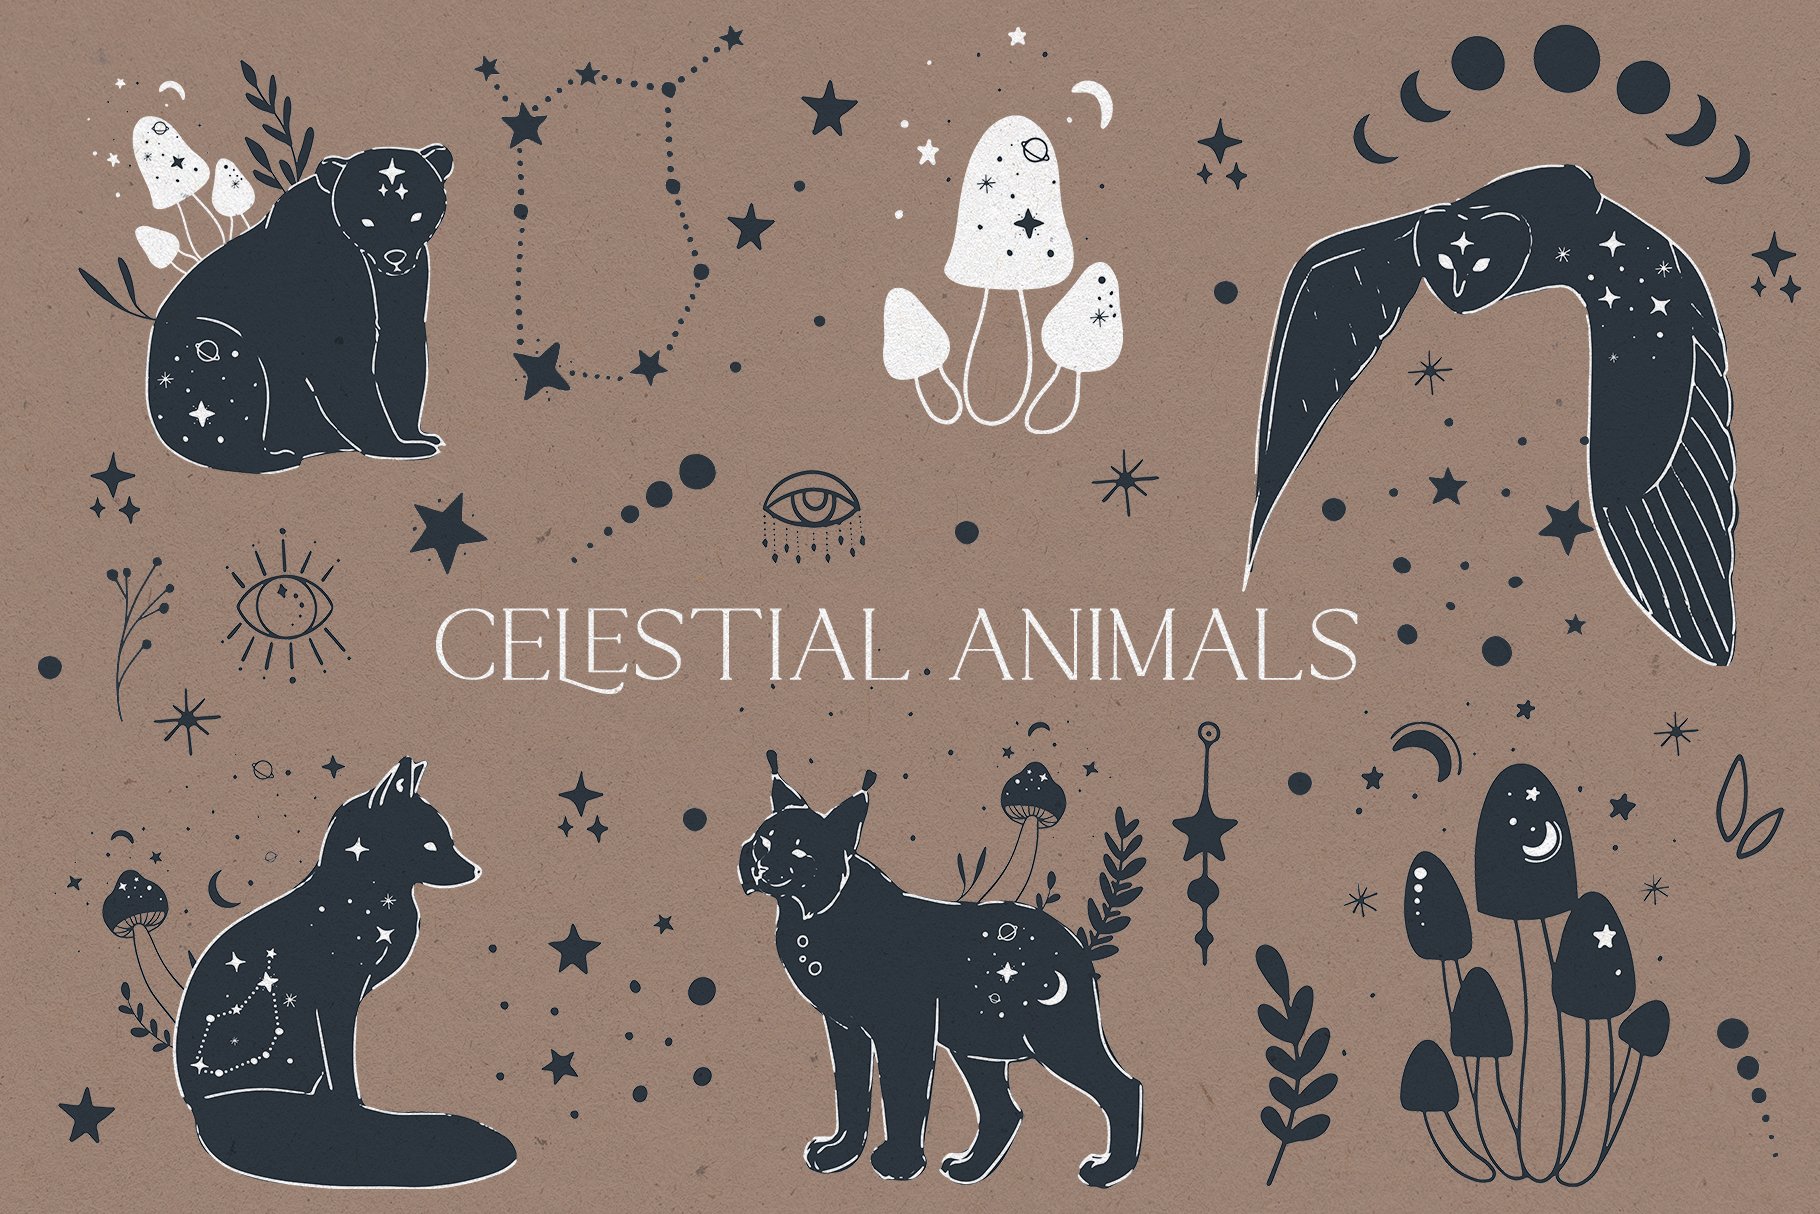 Celestial Animals Collection cover image.